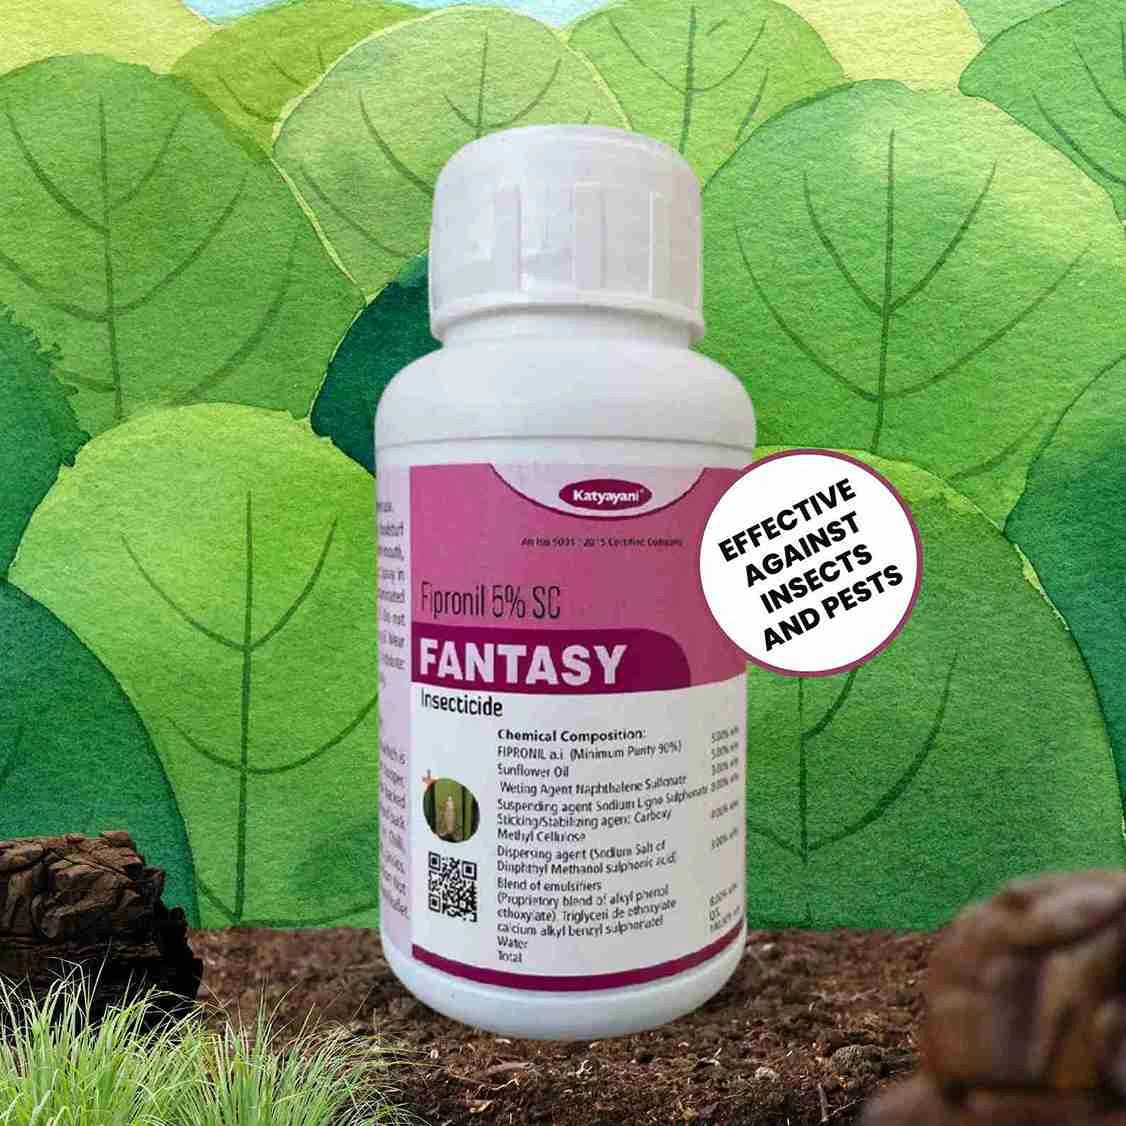 Fantasy insecticide priKatyayani Fantasy | Fipronil 5% SC | Chemical insecticide